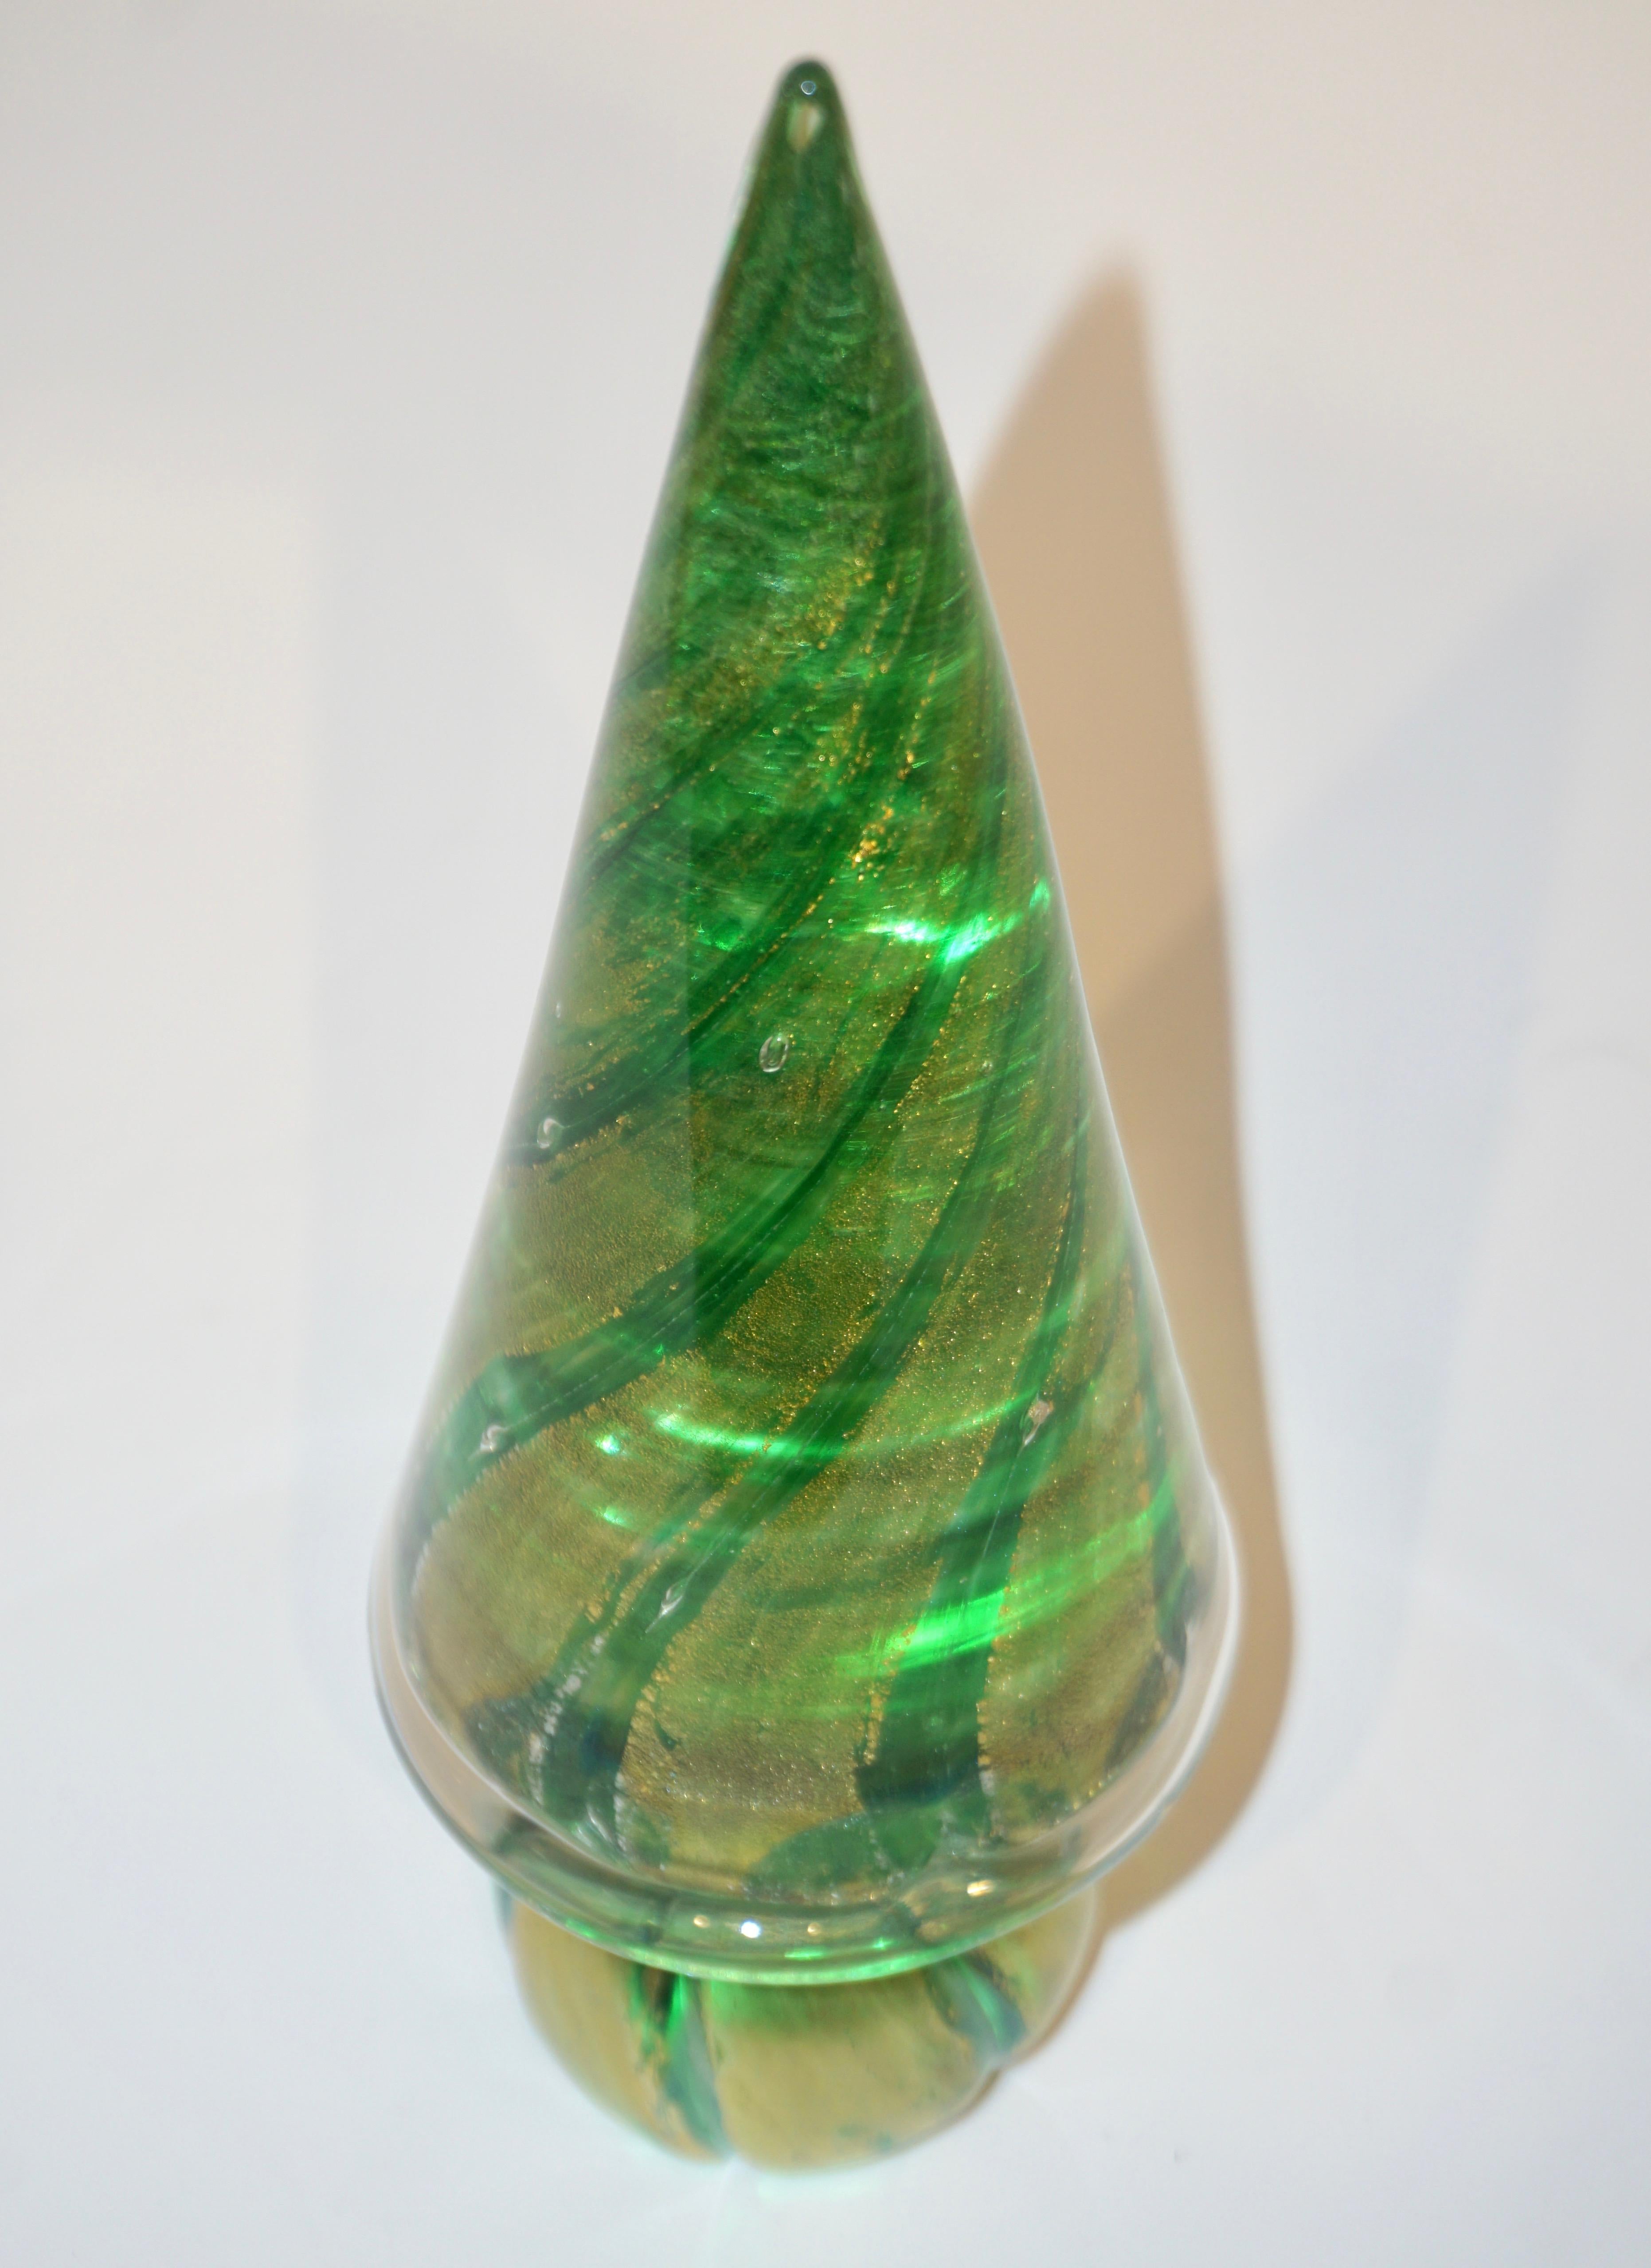 Organic Modern Formia 1980s Italian Vintage Green and Gold Murano Glass Tree Sculpture